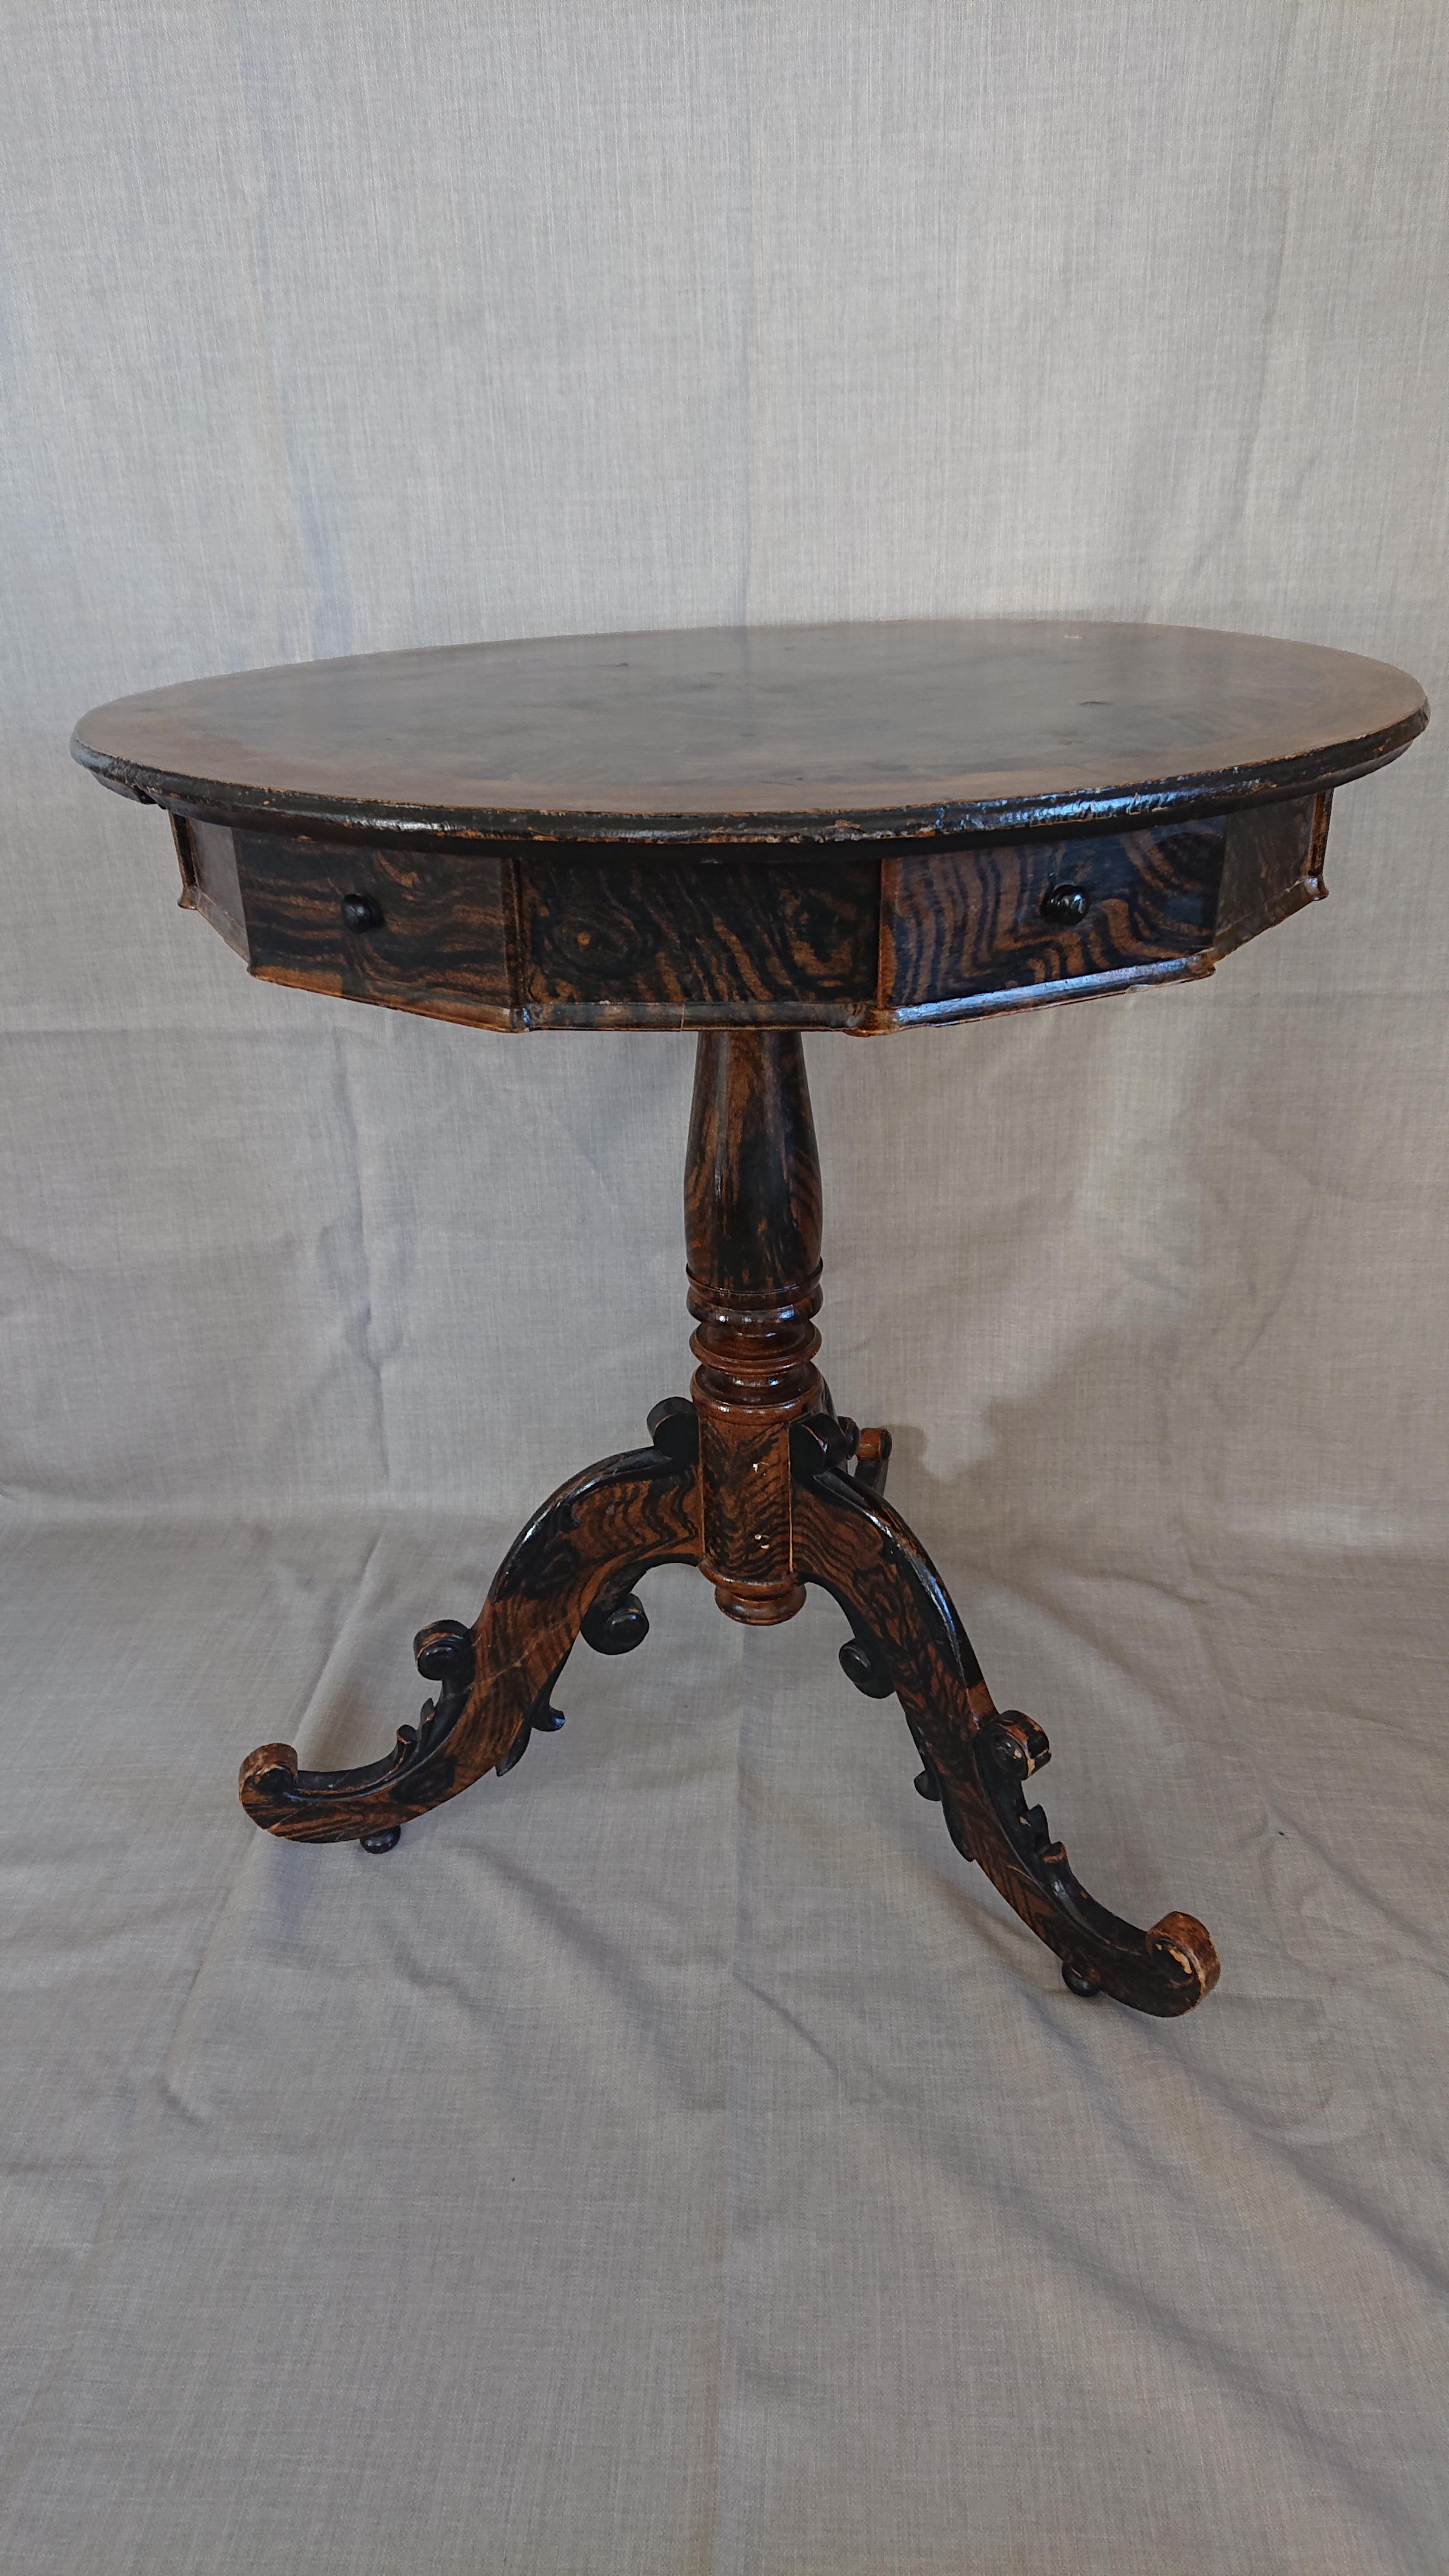 Exceptional 19th Century Pedestal table with drawers from Pitea Norrbotten, North of Sweden.
Untouched original paint with walnut imitation.
Unusual with drawers. Two drawers with function. Others are blind drawers just for the sake of decoration.